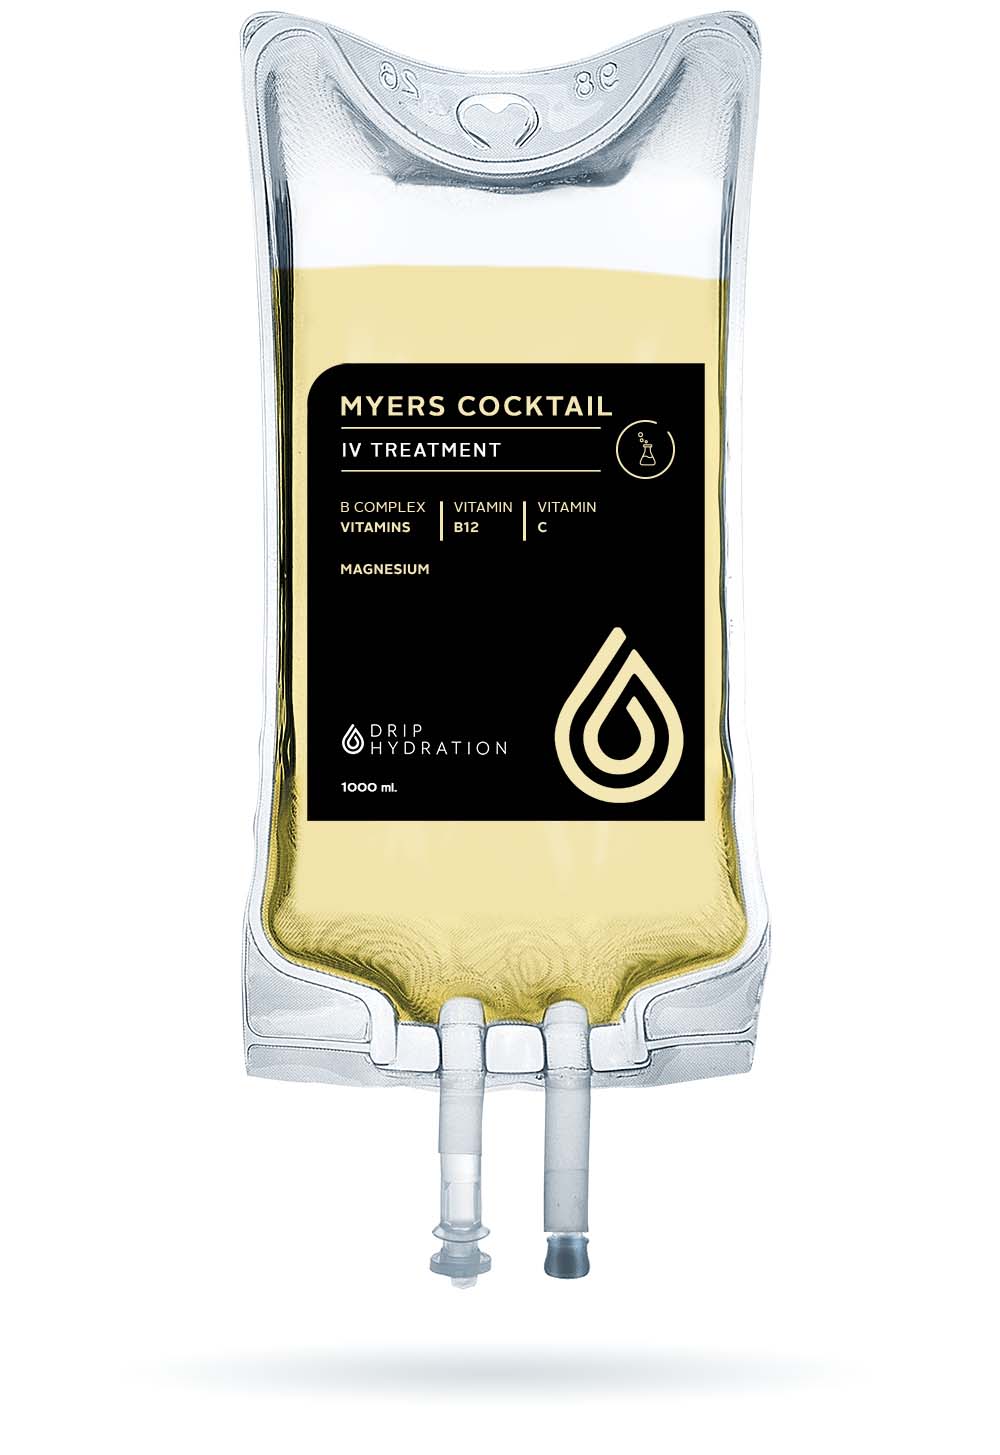 Myers cocktail iv treatment